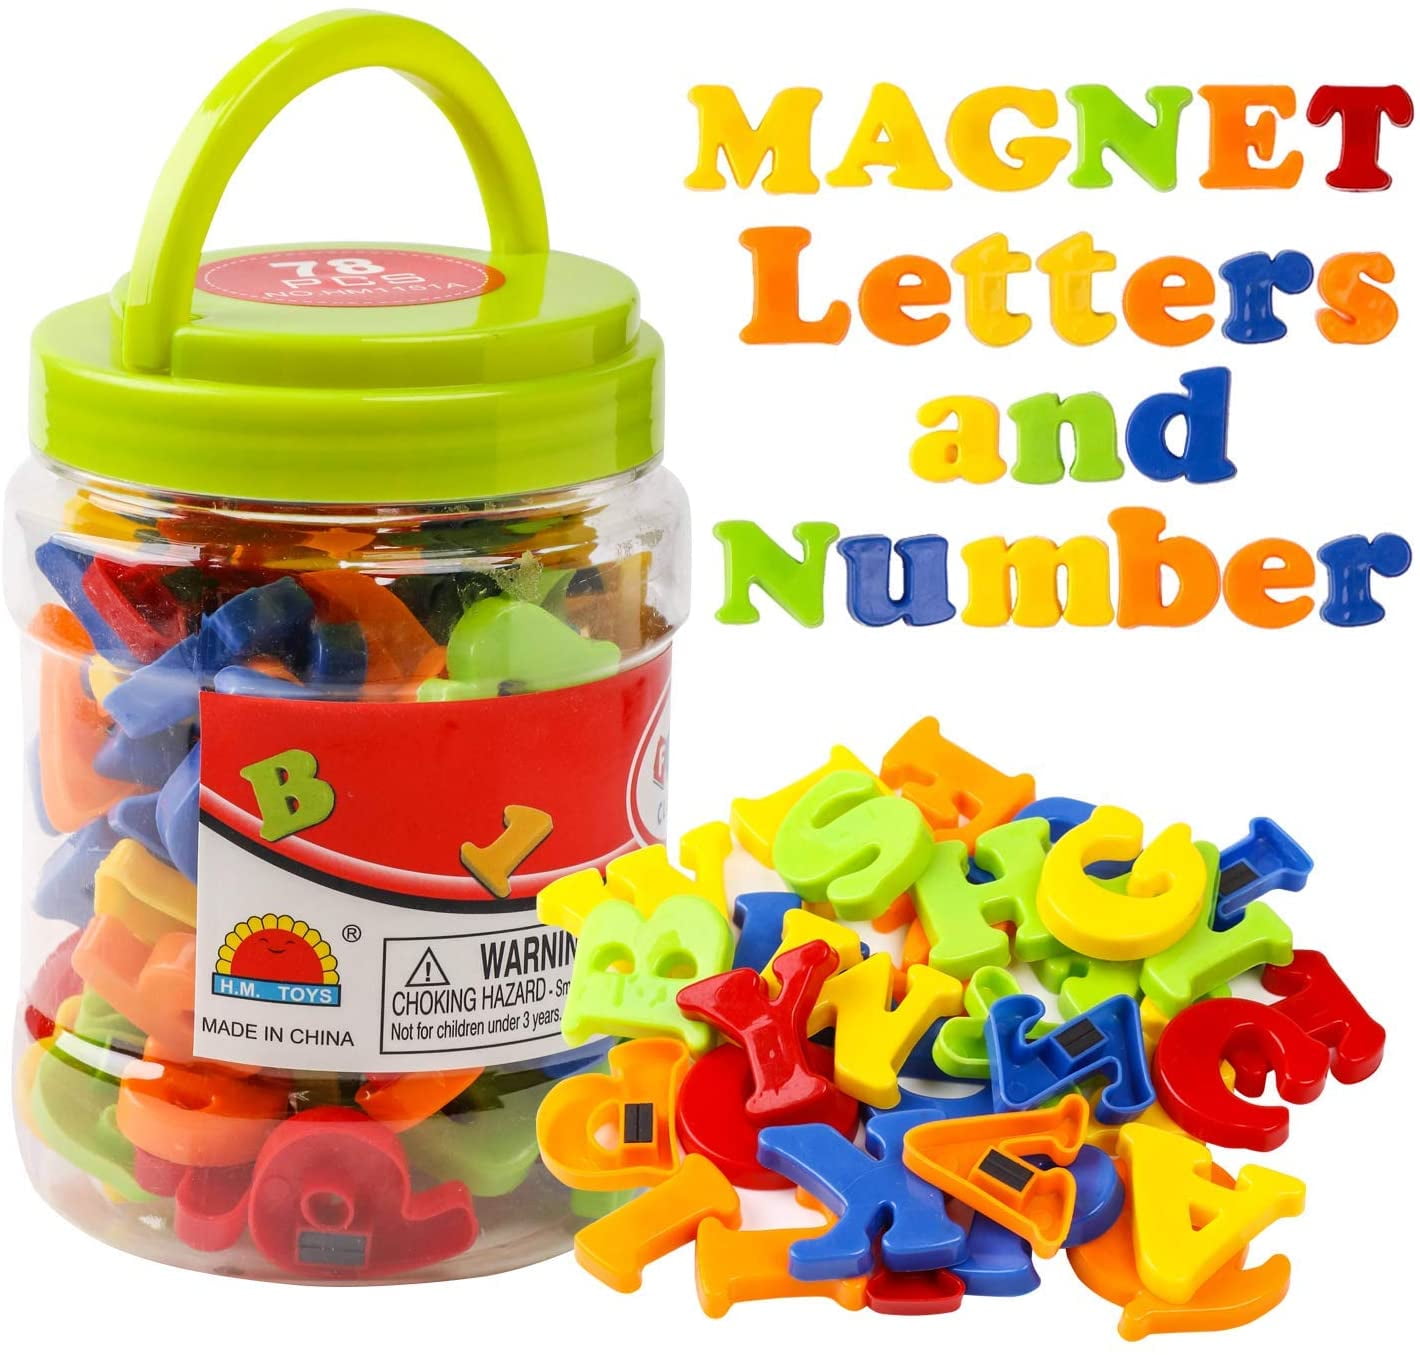 Fun Alphabet Kit for Kids ABC Educationa MAGTIMES Magnetic Letters and Numbers 